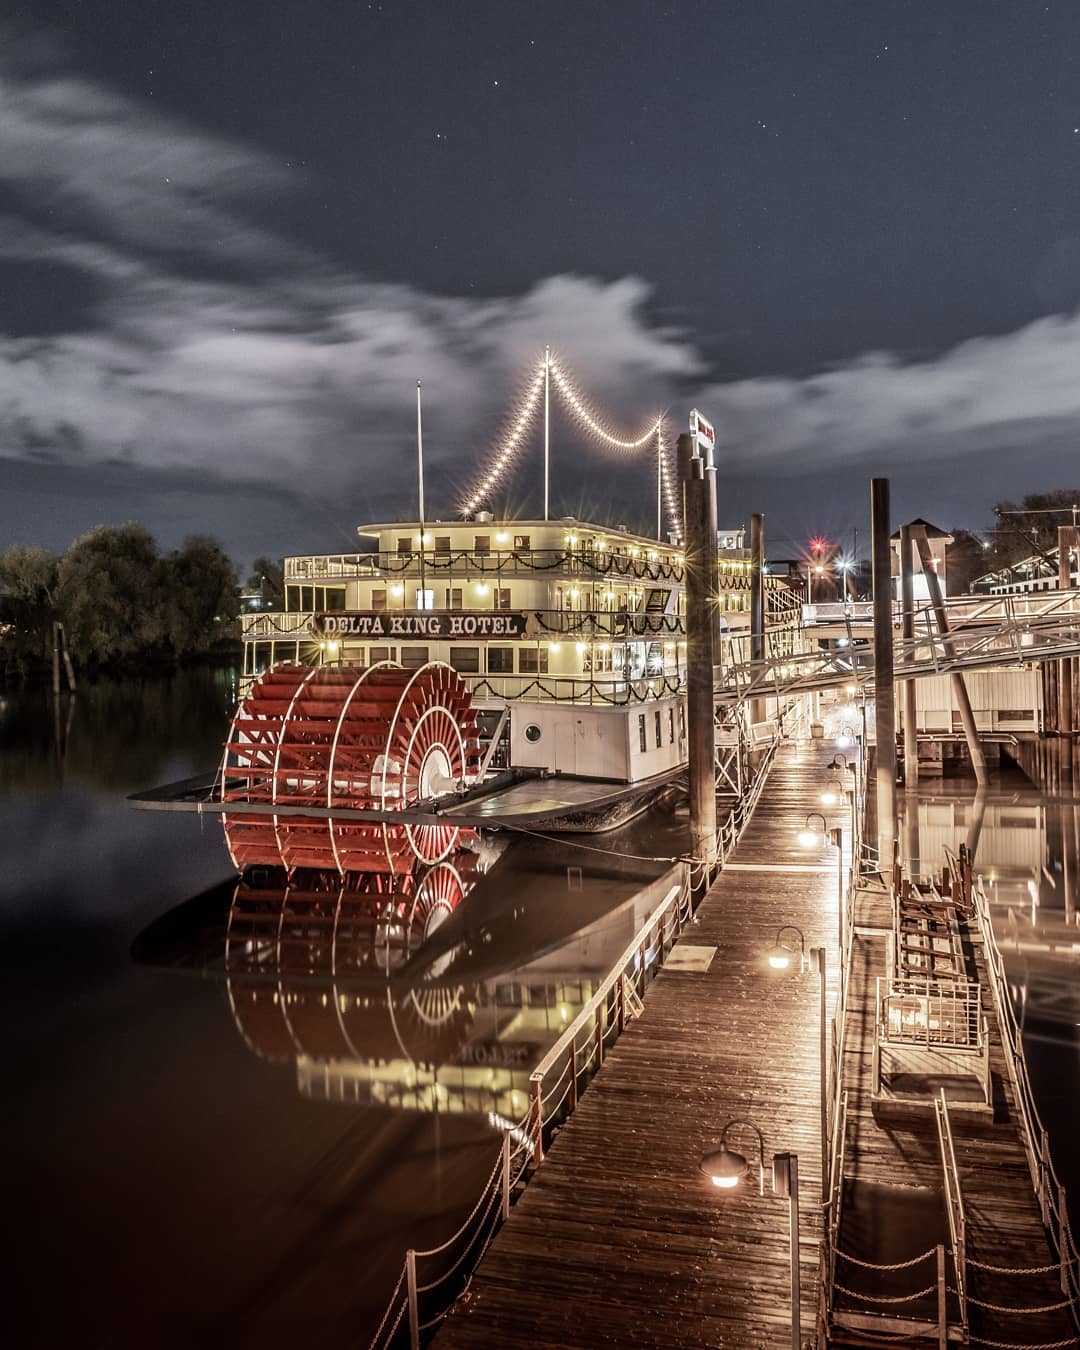 Riverboat with lights on it. Photo by Instagram user @mattfraser9